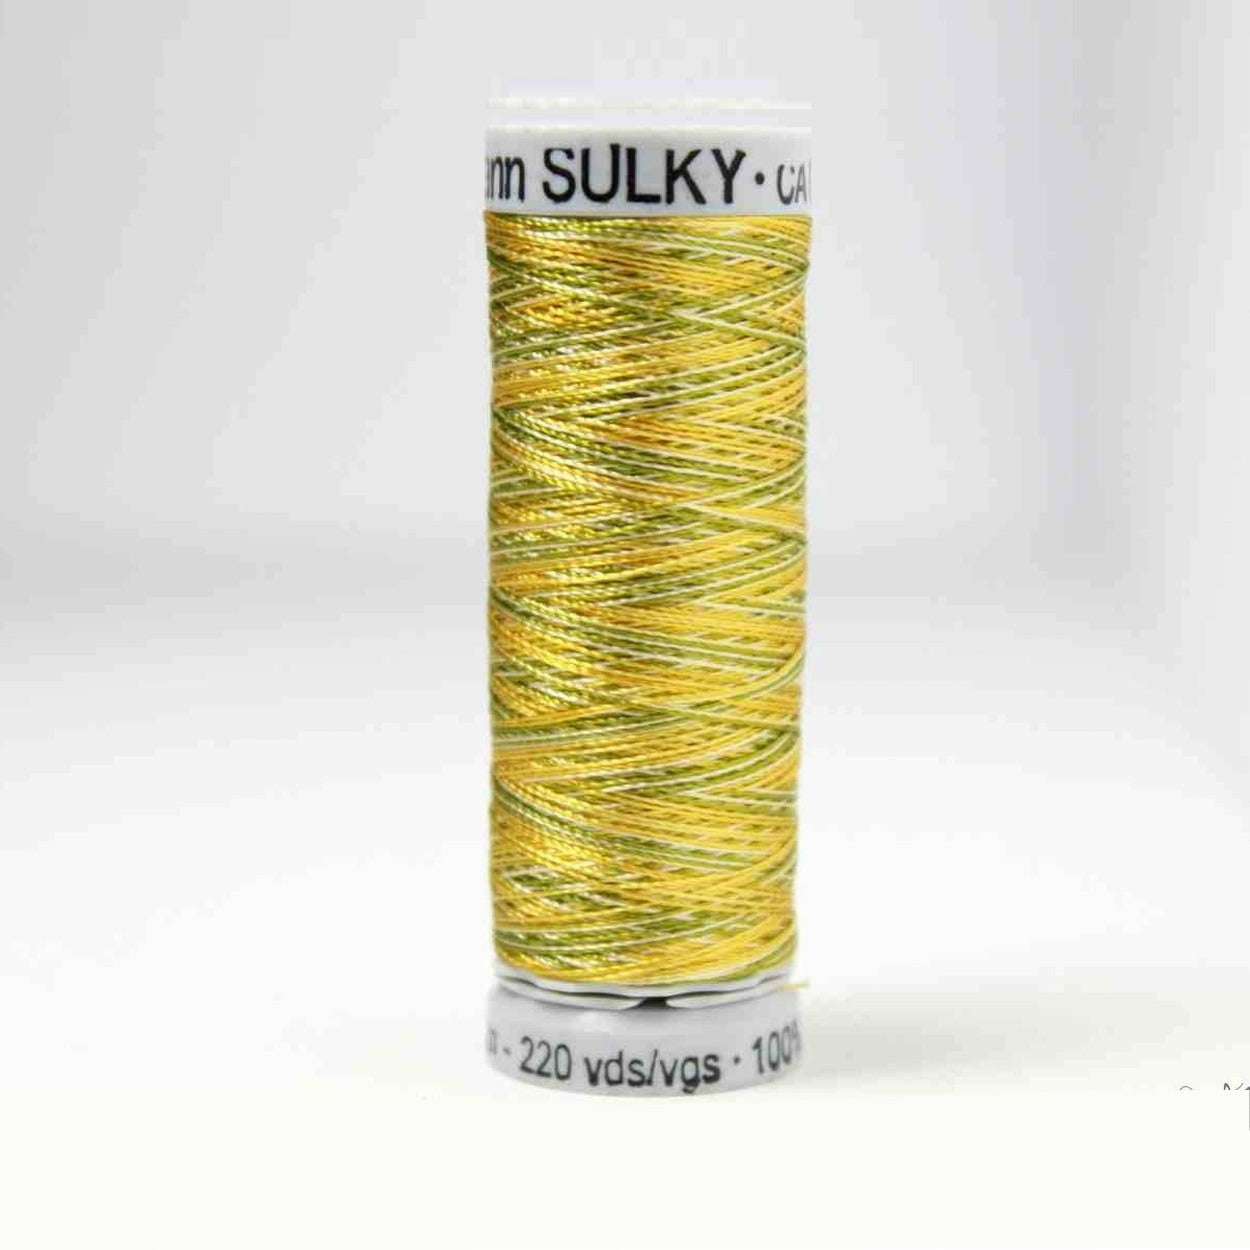 Sulky Rayon 40 Embroidery Thread 2114 Vari-Avocado Greens from Jaycotts Sewing Supplies